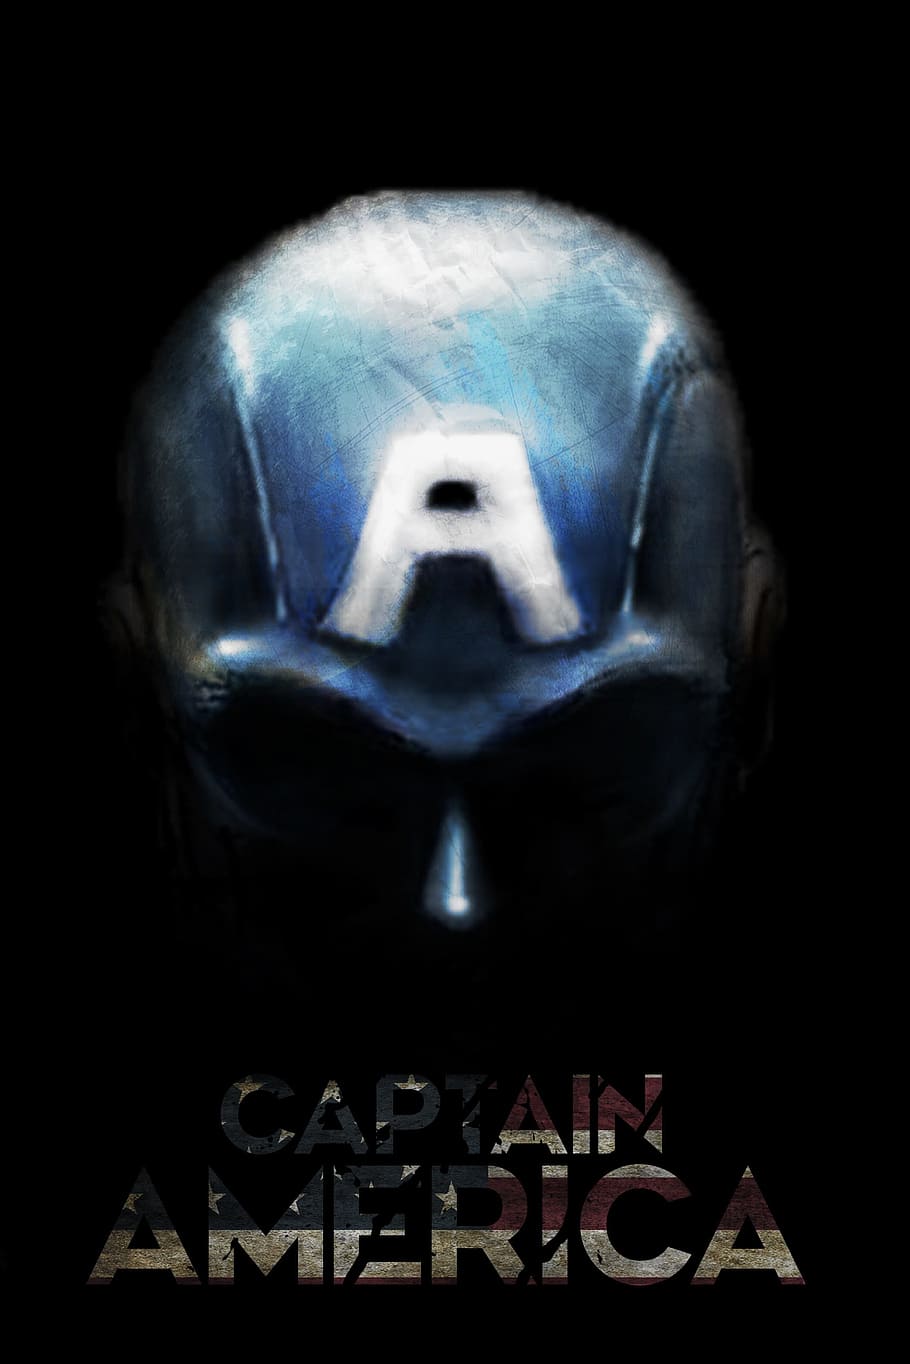 captain america, capitanamerica, marvel, avengers, movies, action, close-up, text, black background, human body part